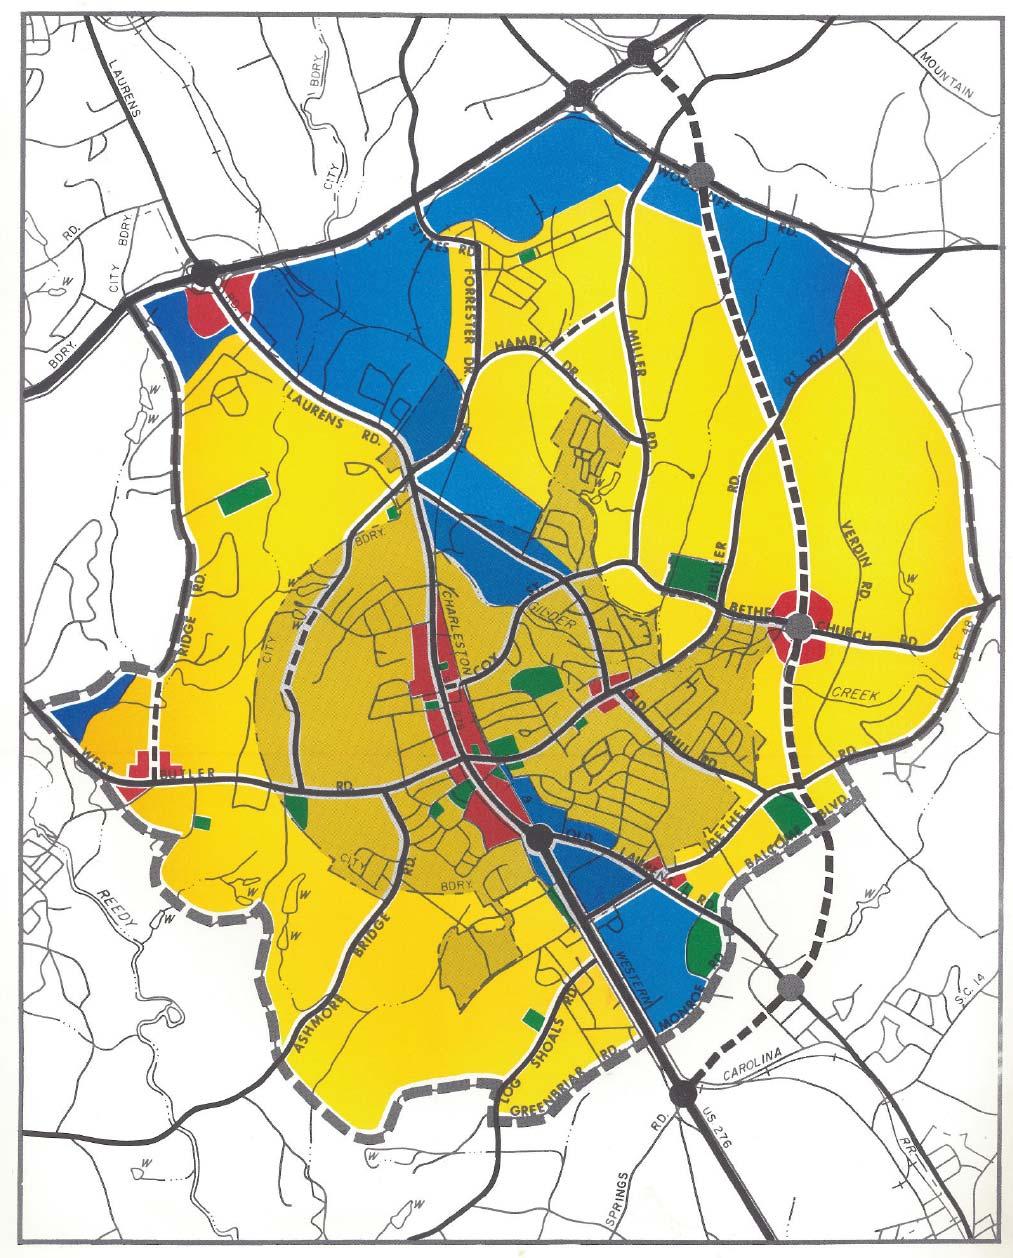 Residential. Dashed lines are proposed arterial roads. Map 5.